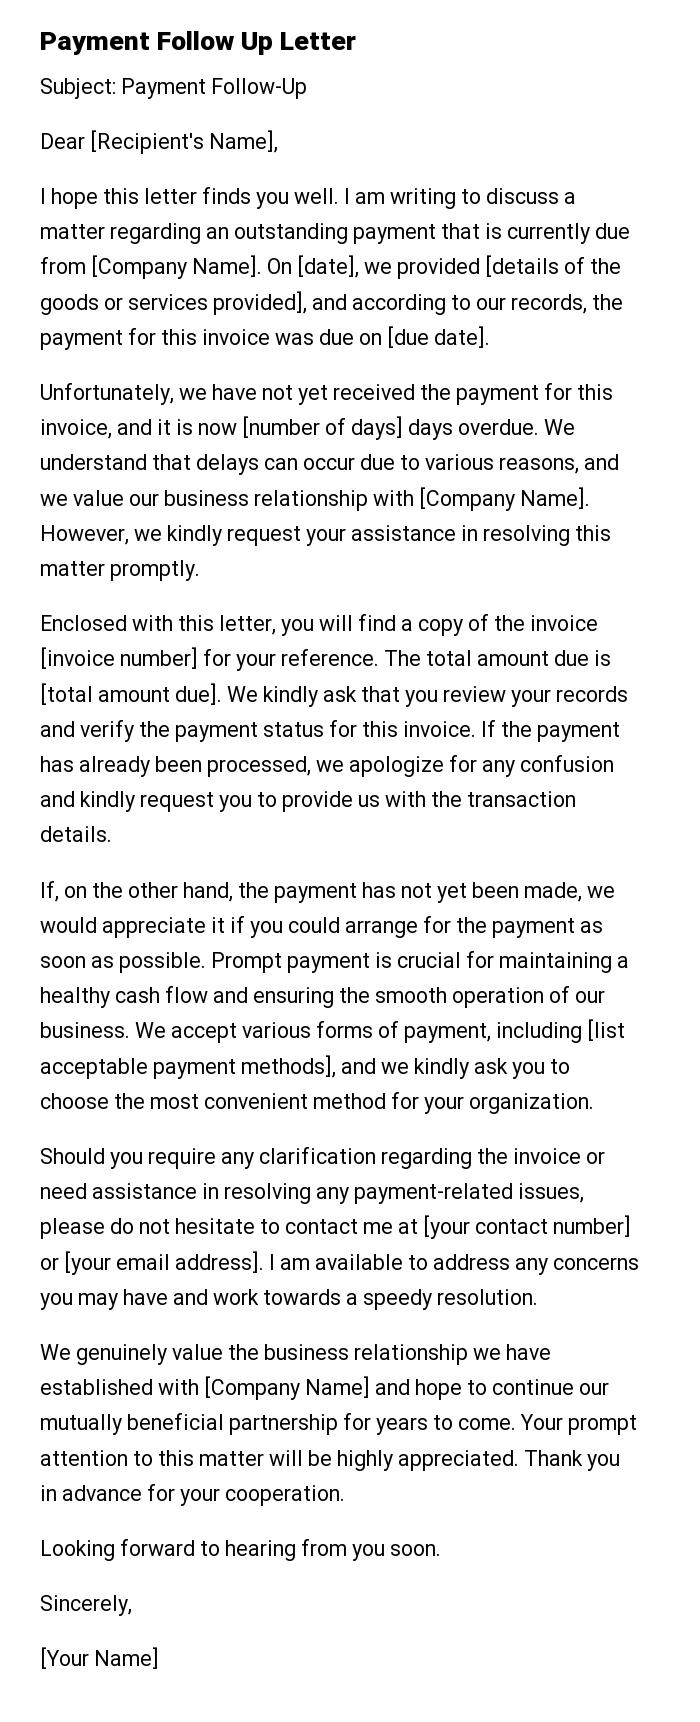 Payment Follow Up Letter